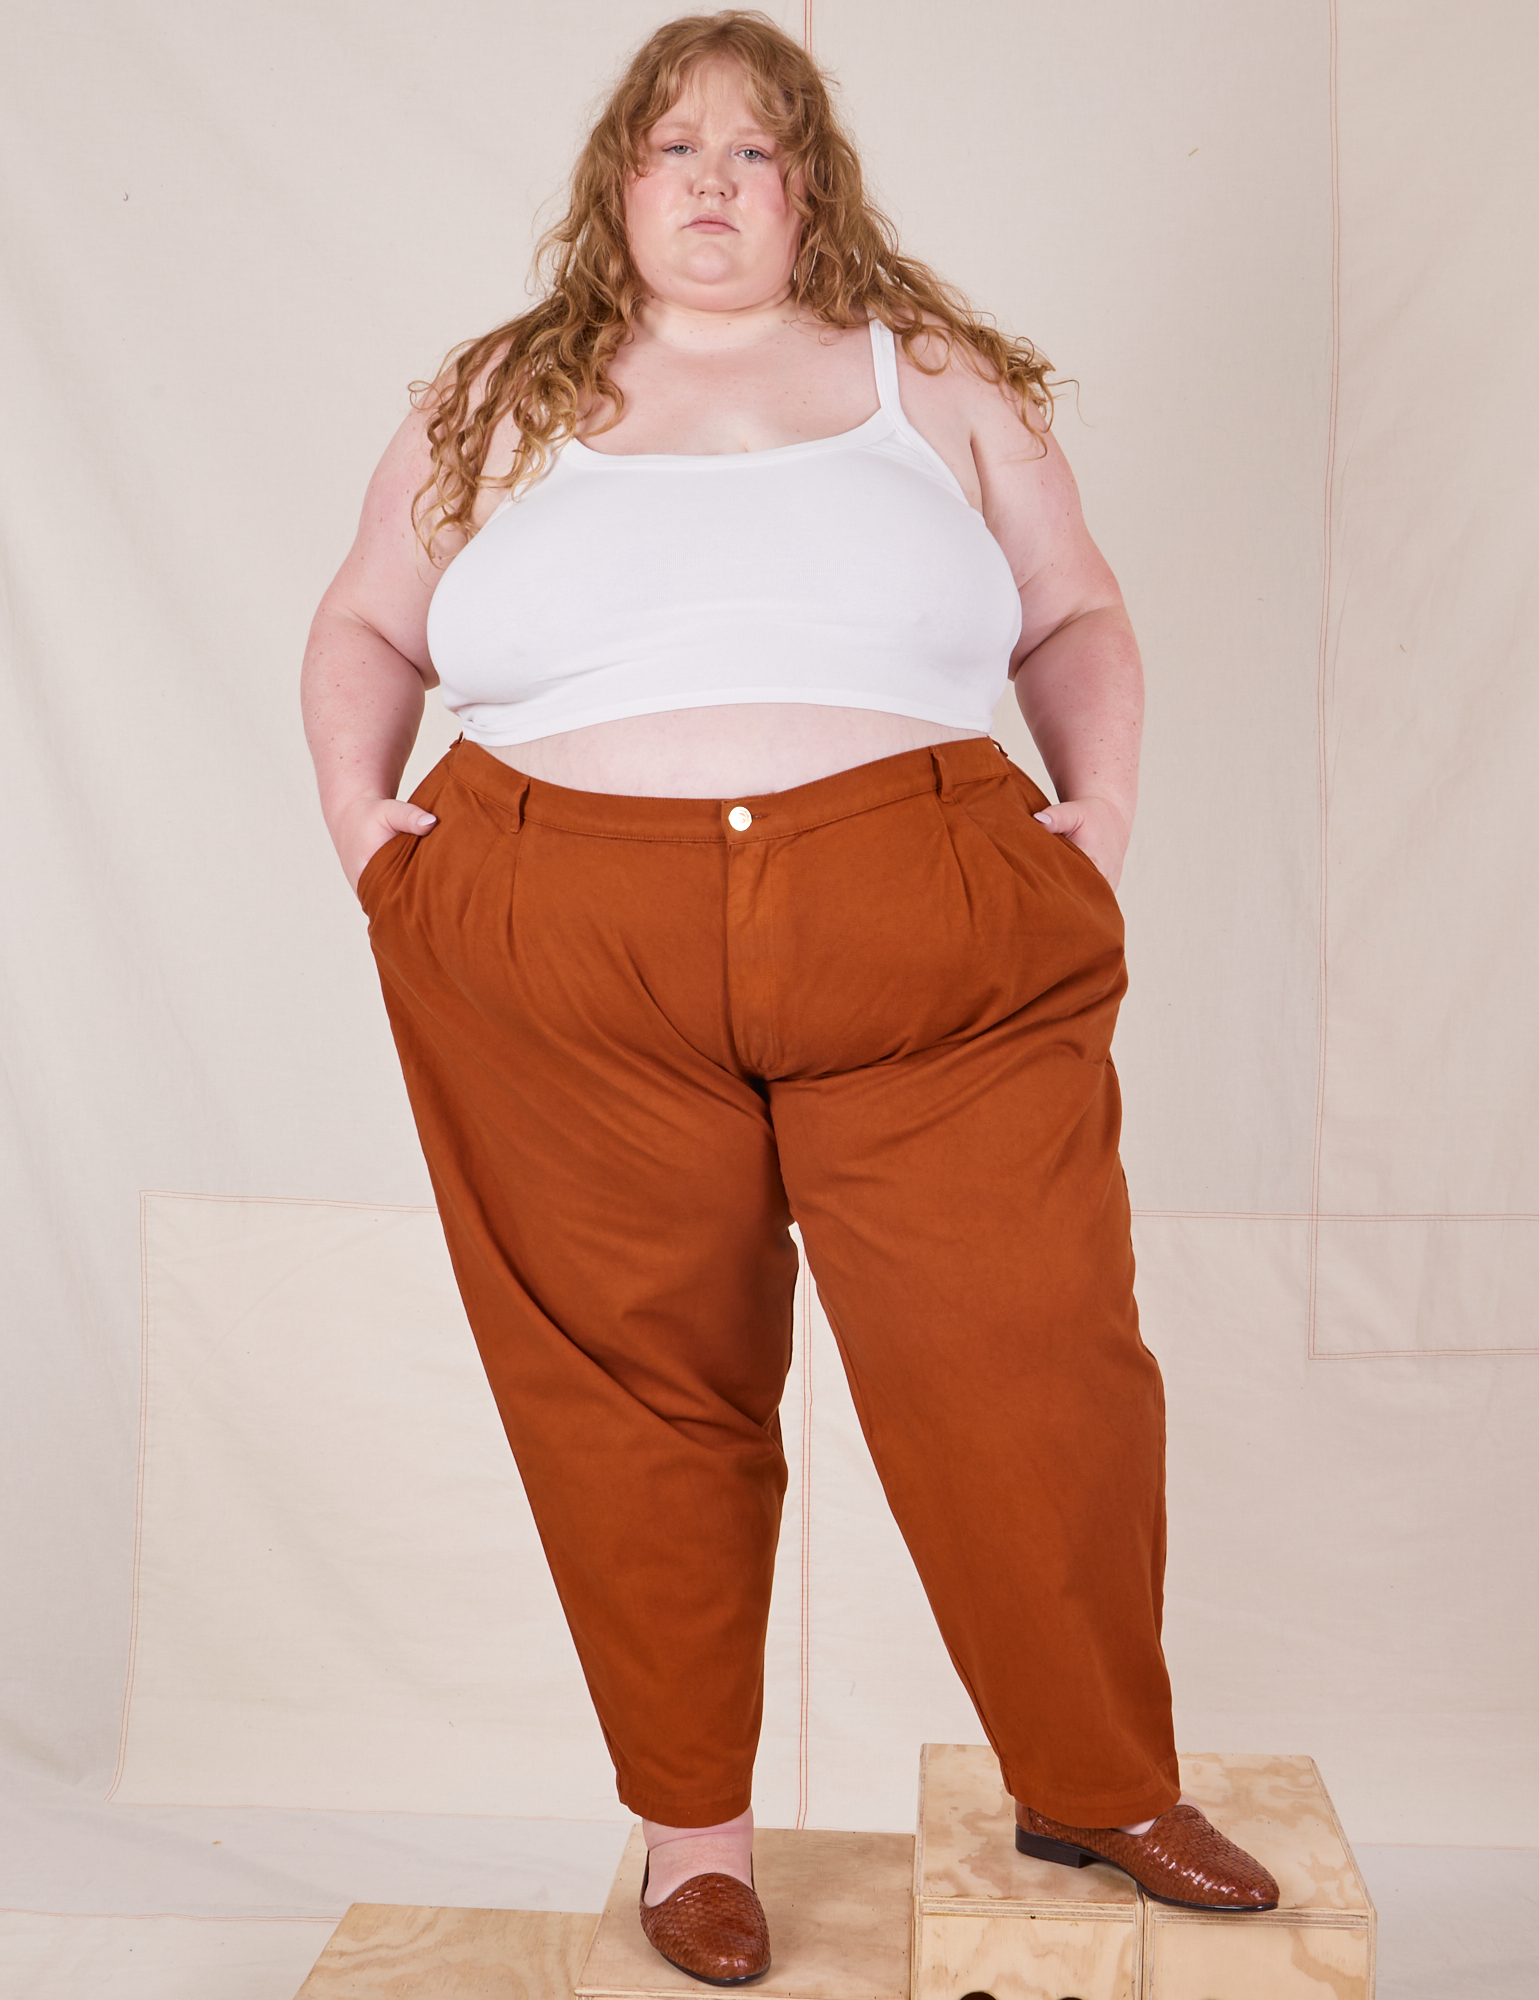 Catie is 5&#39;11&quot; and wearing 4XL Heavyweight Trousers in Burnt Terracotta paired with vintage off-white Cropped Cami